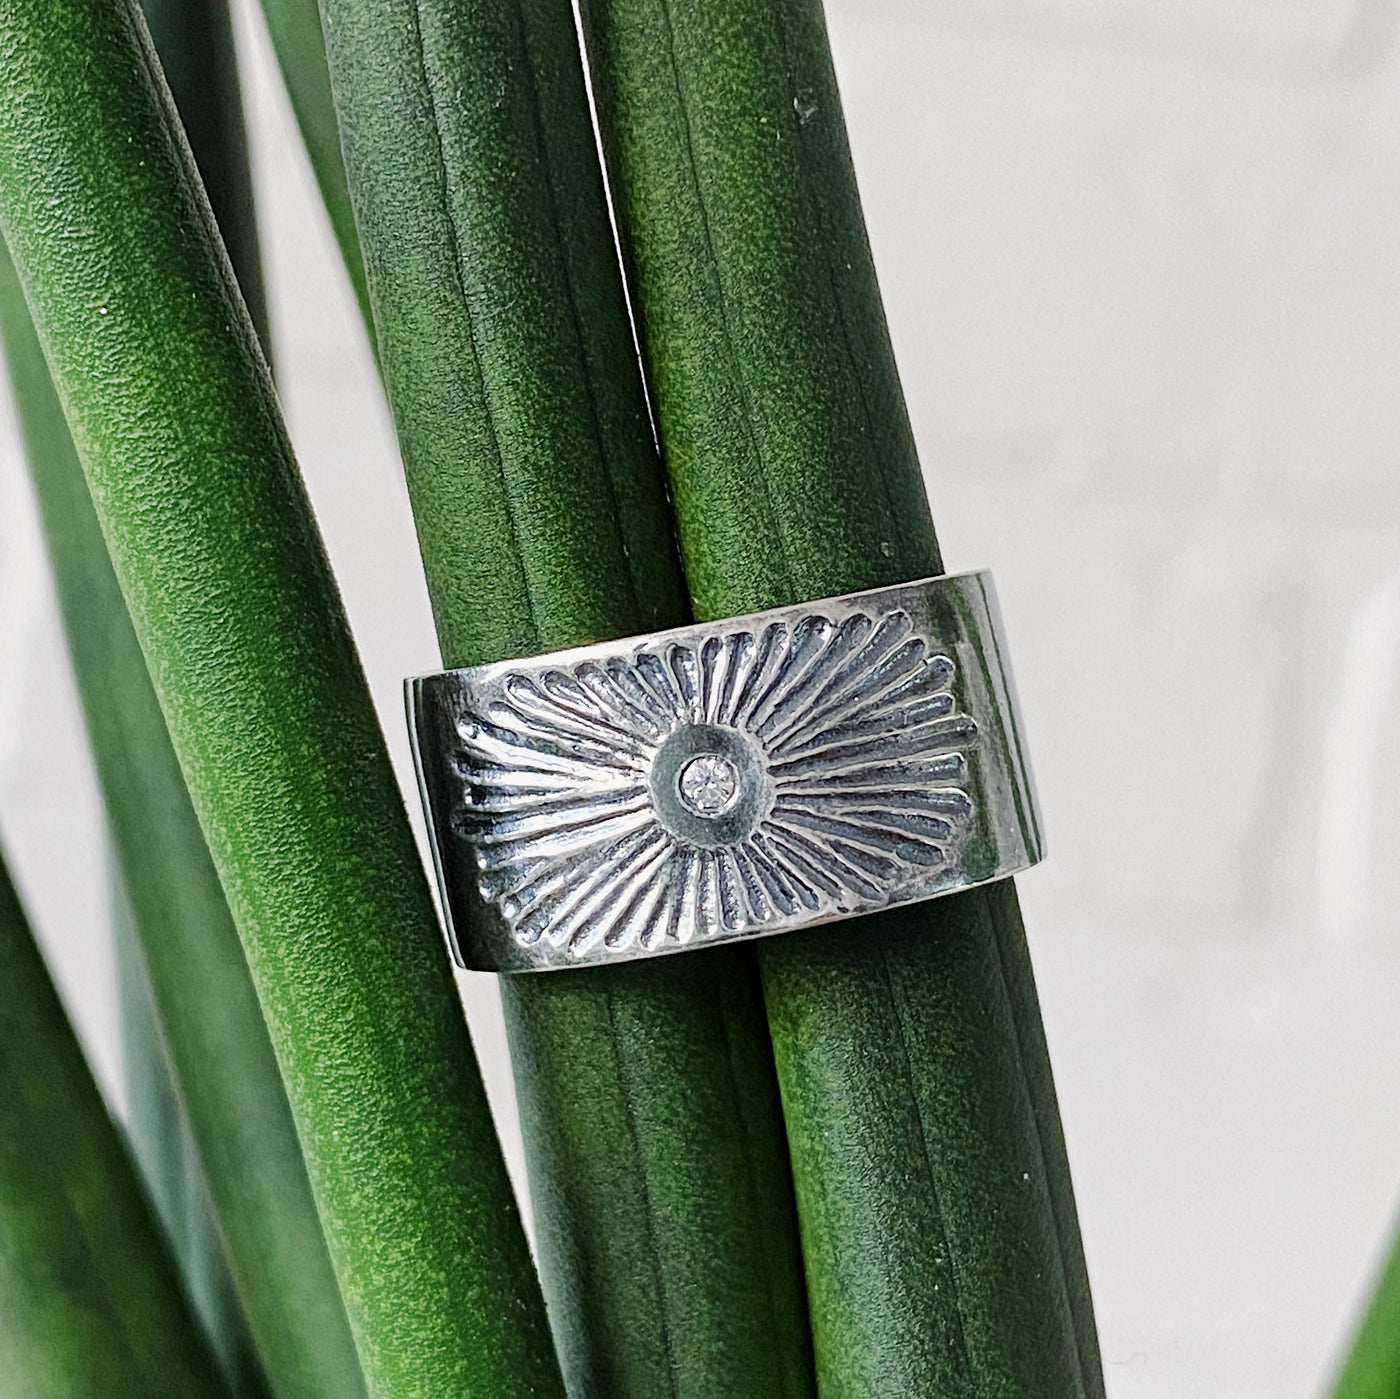 Oxidized silver wide band with single diamond and a carved sunburst design in natural light by Corey Egan